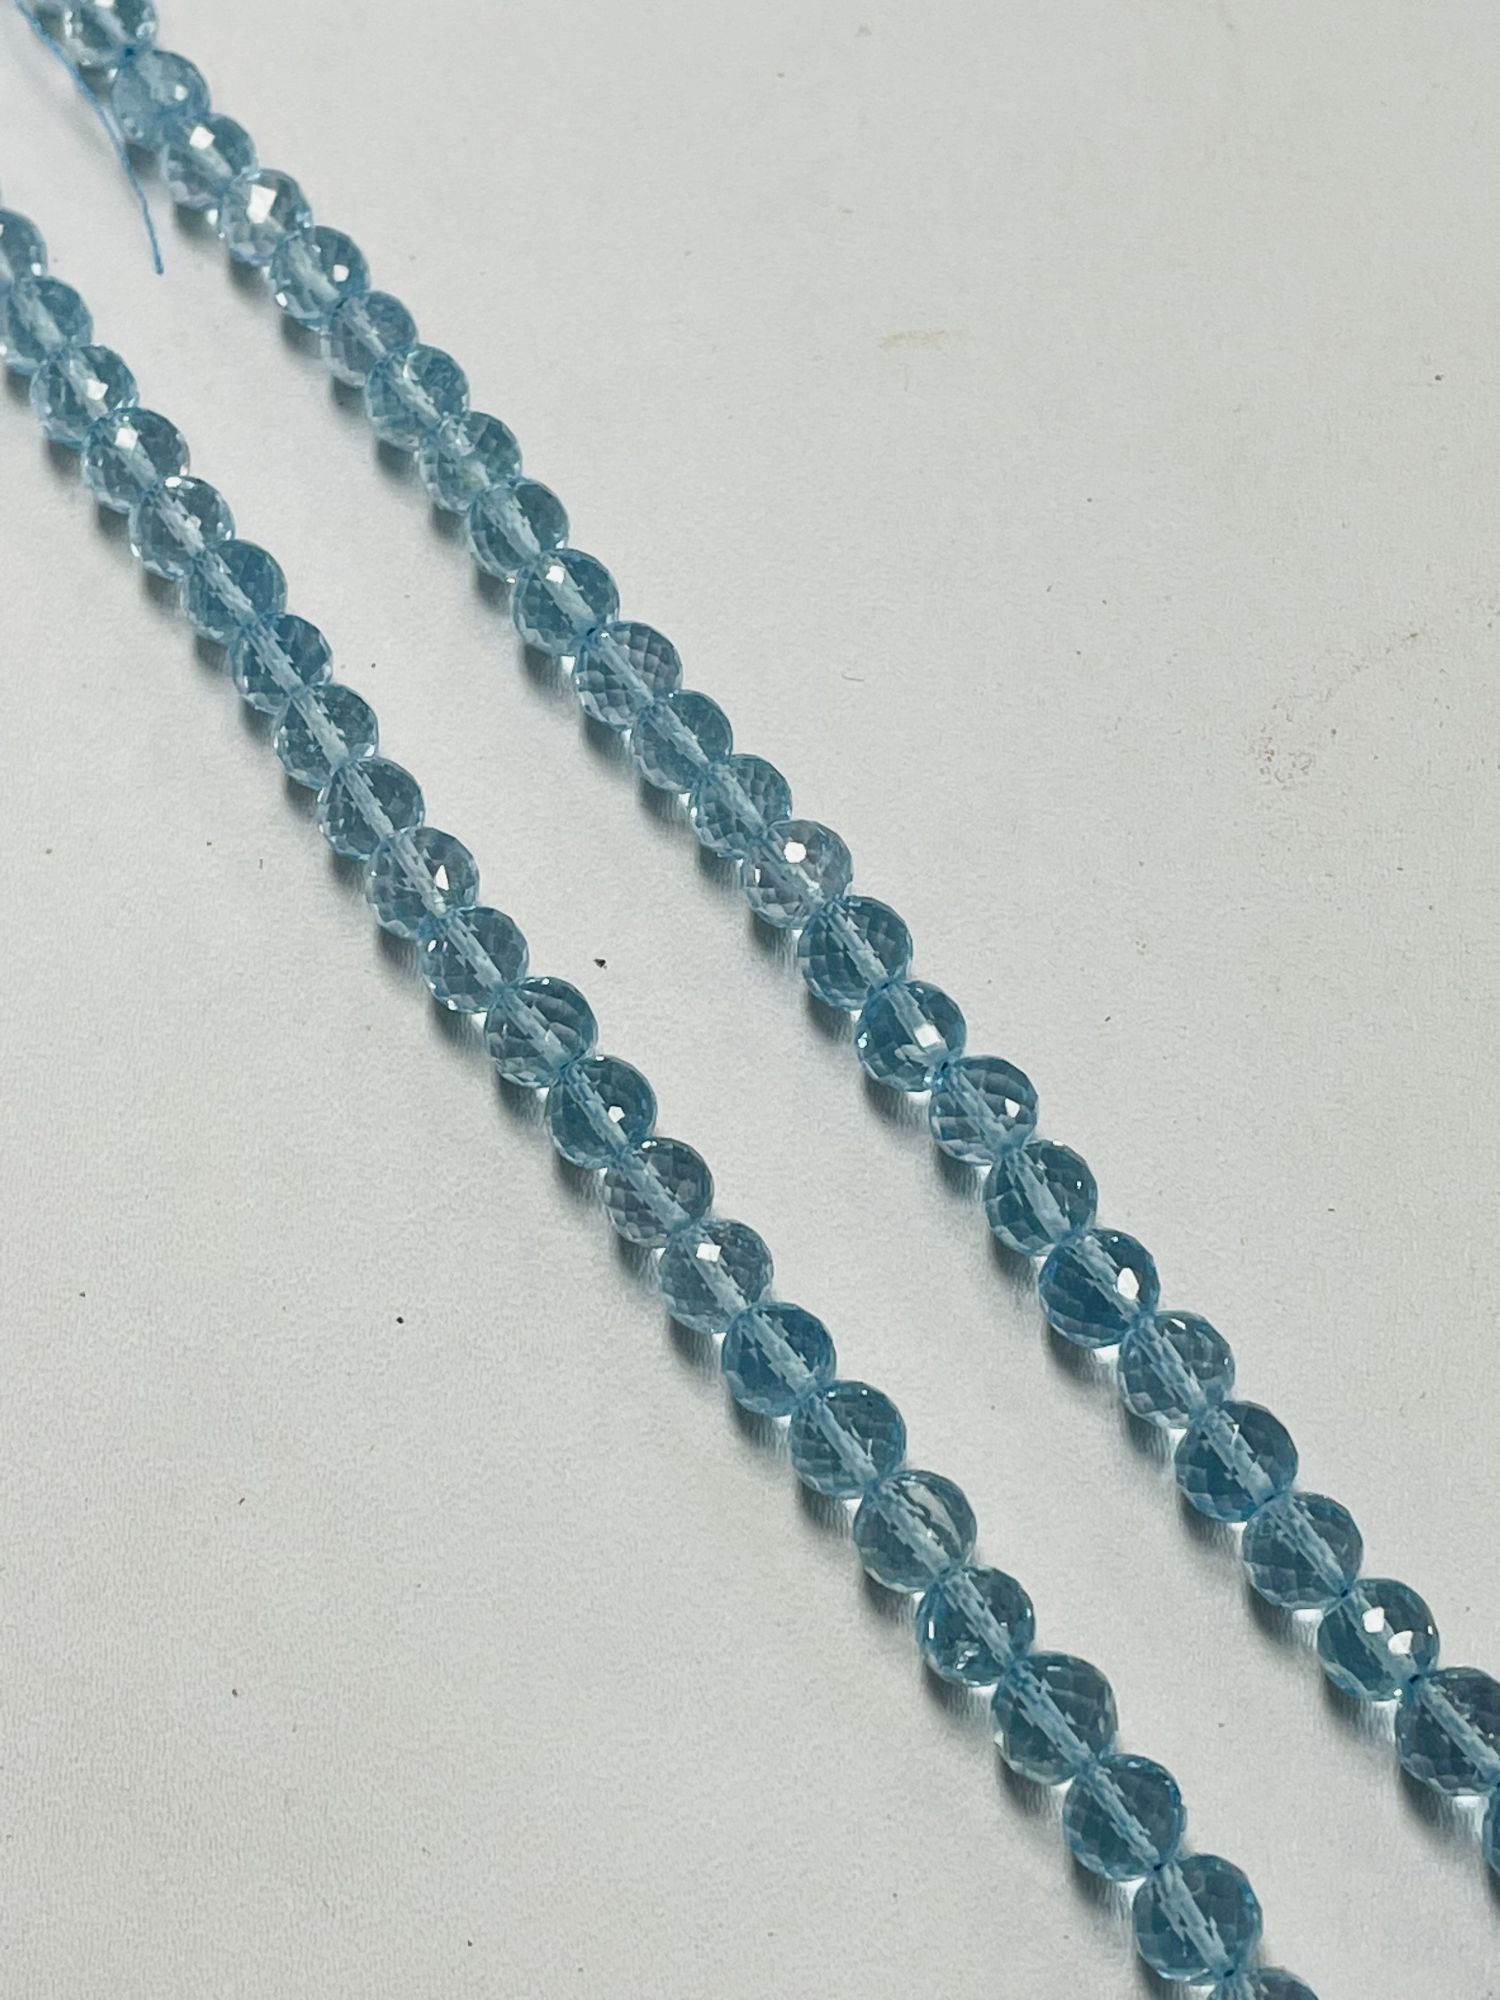 Blue Topaz Round Faceted